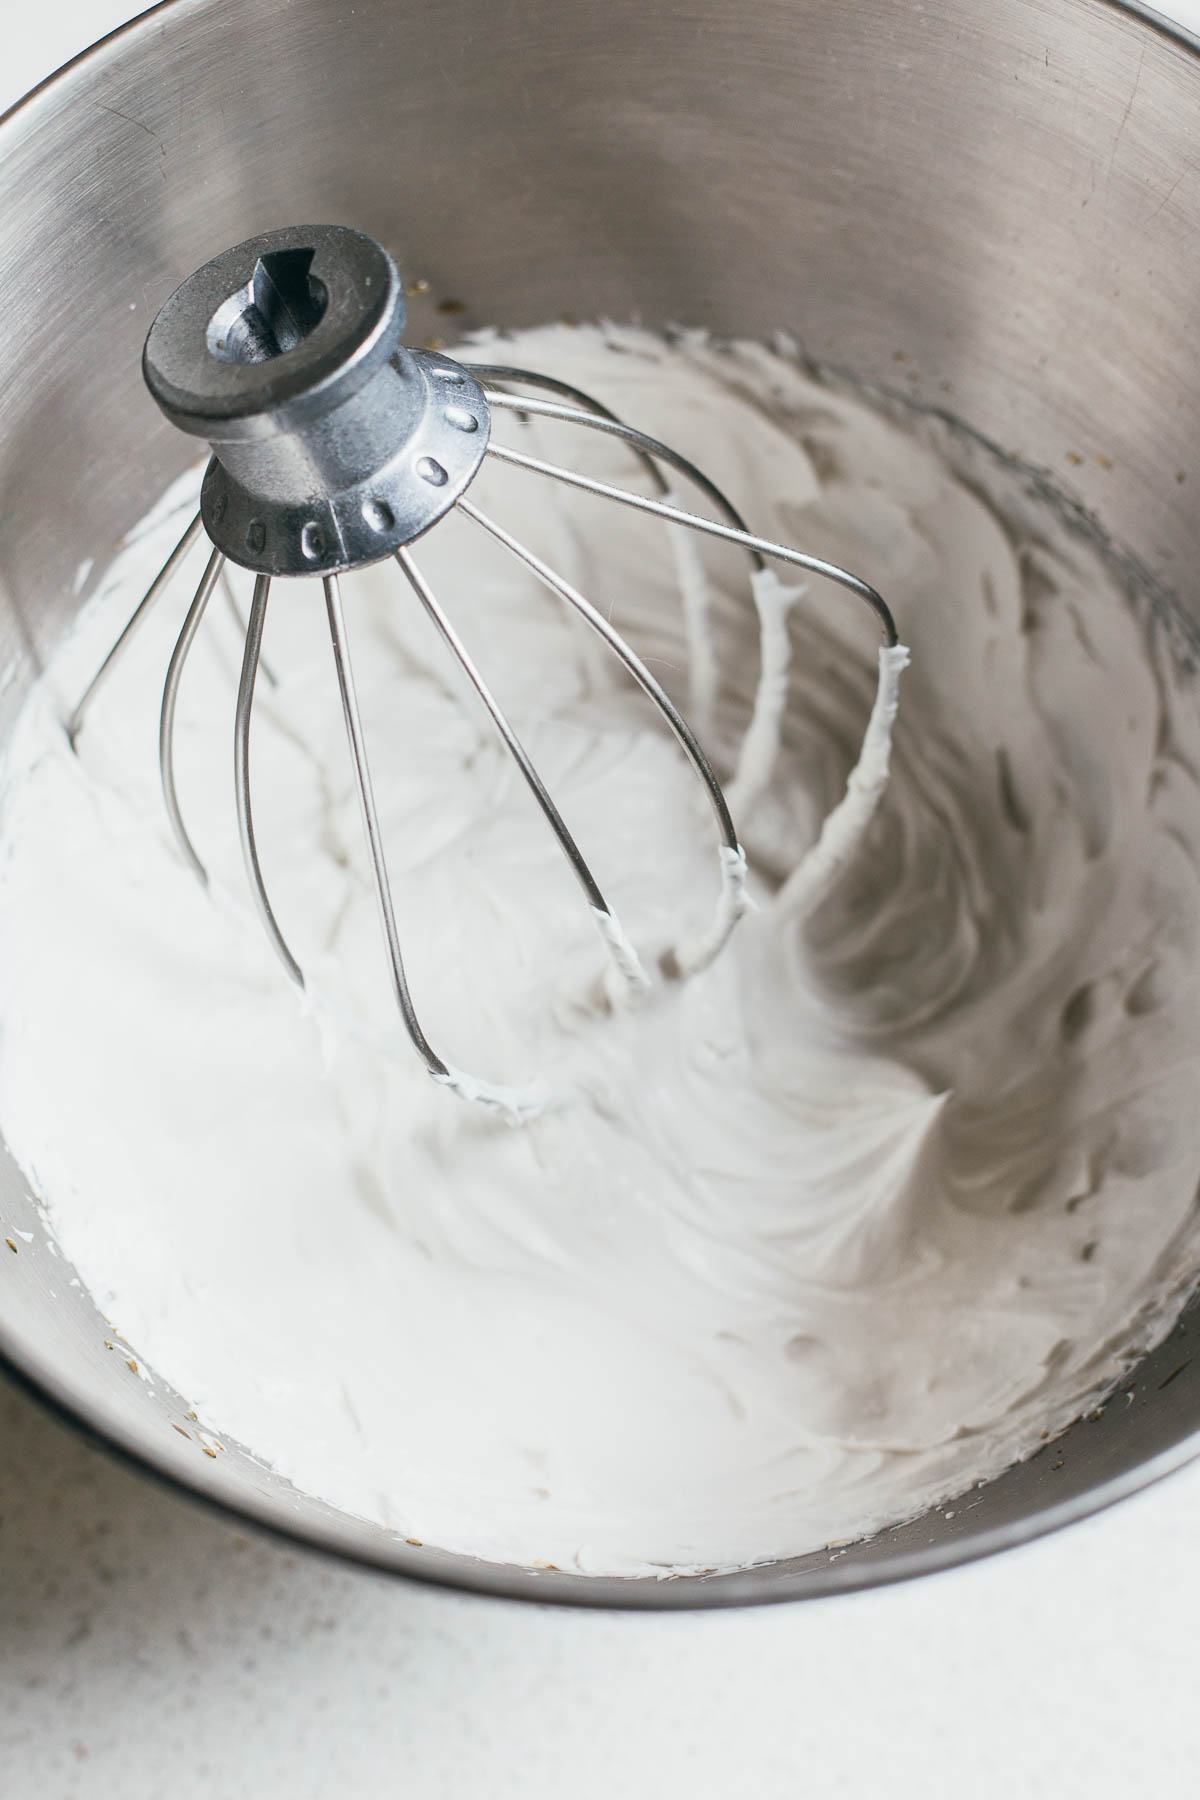 Whipped cream in a metal bowl with the mixing attachment in the bowl.